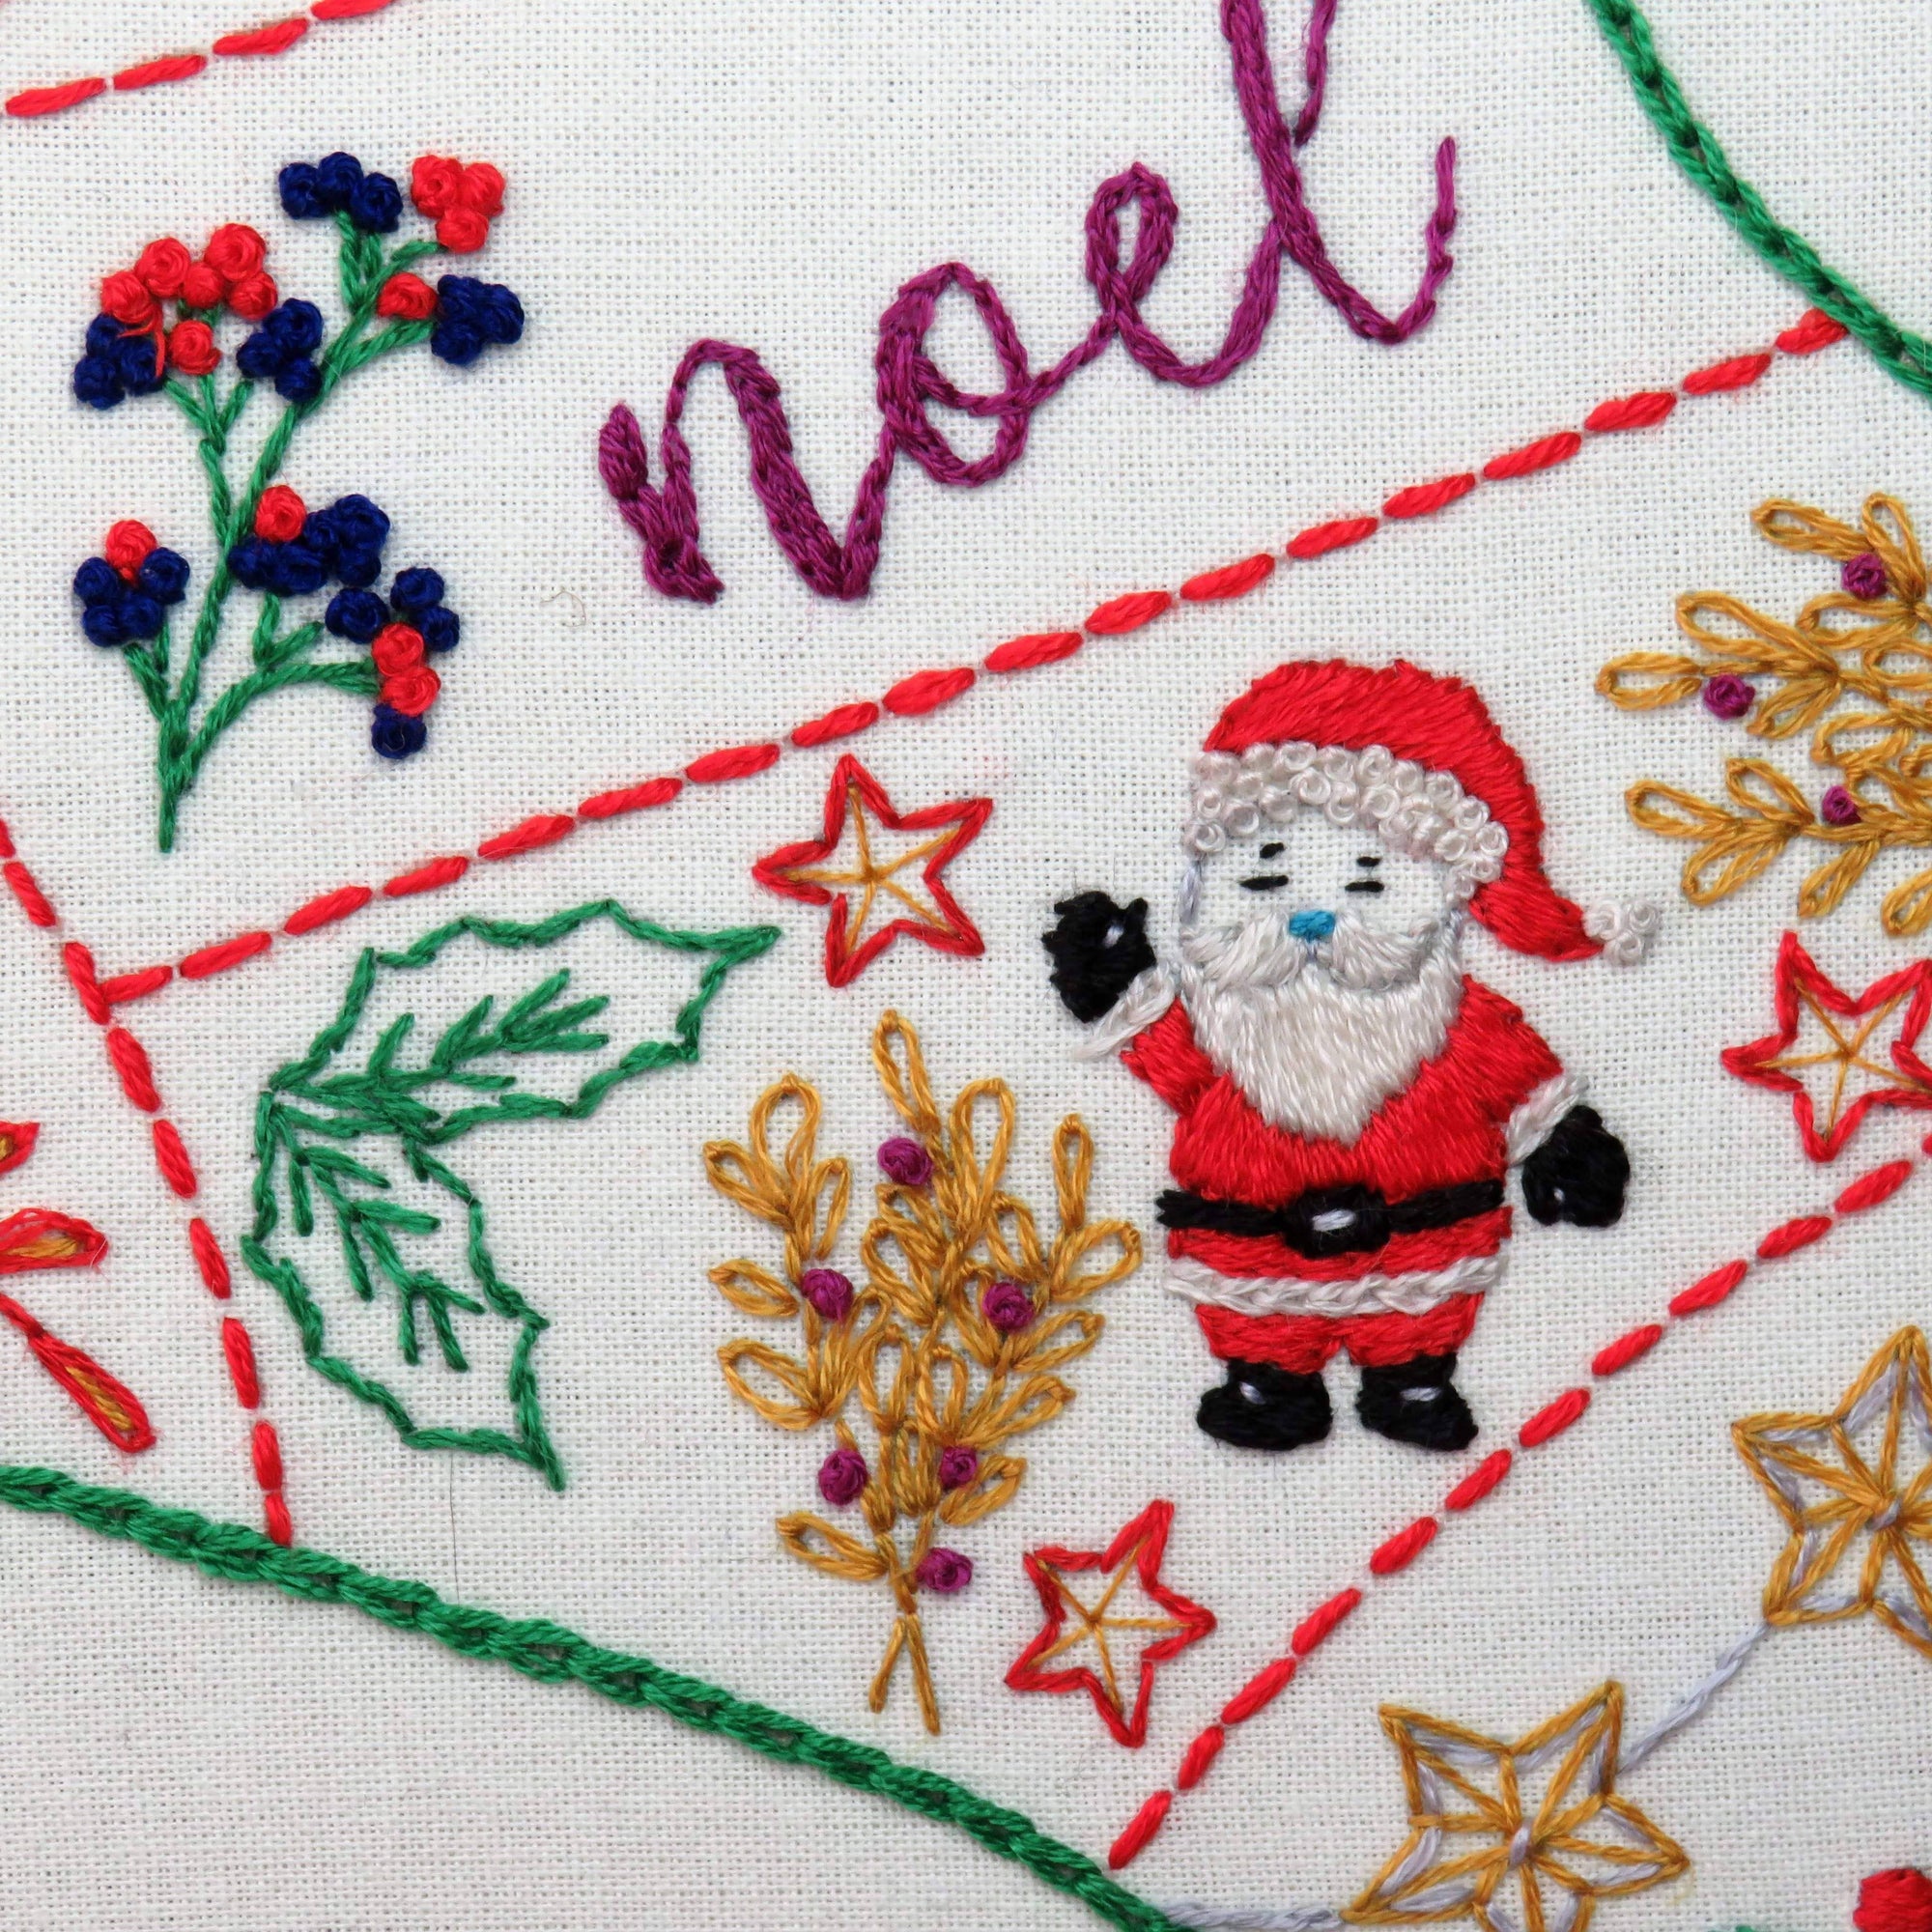 Christmas Stocking Pre Printed Embroidery Fabric Panel , Pre Printed Fabric Pattern , StitchDoodles , christmas, embroidery hoop kit, Embroidery Kit, embroidery kit for adults, embroidery kit fro beginners, embroidery kits for adults, embroidery kits for beginners, hand embroidery fabric, modern embroidery kits , StitchDoodles , shop.stitchdoodles.com